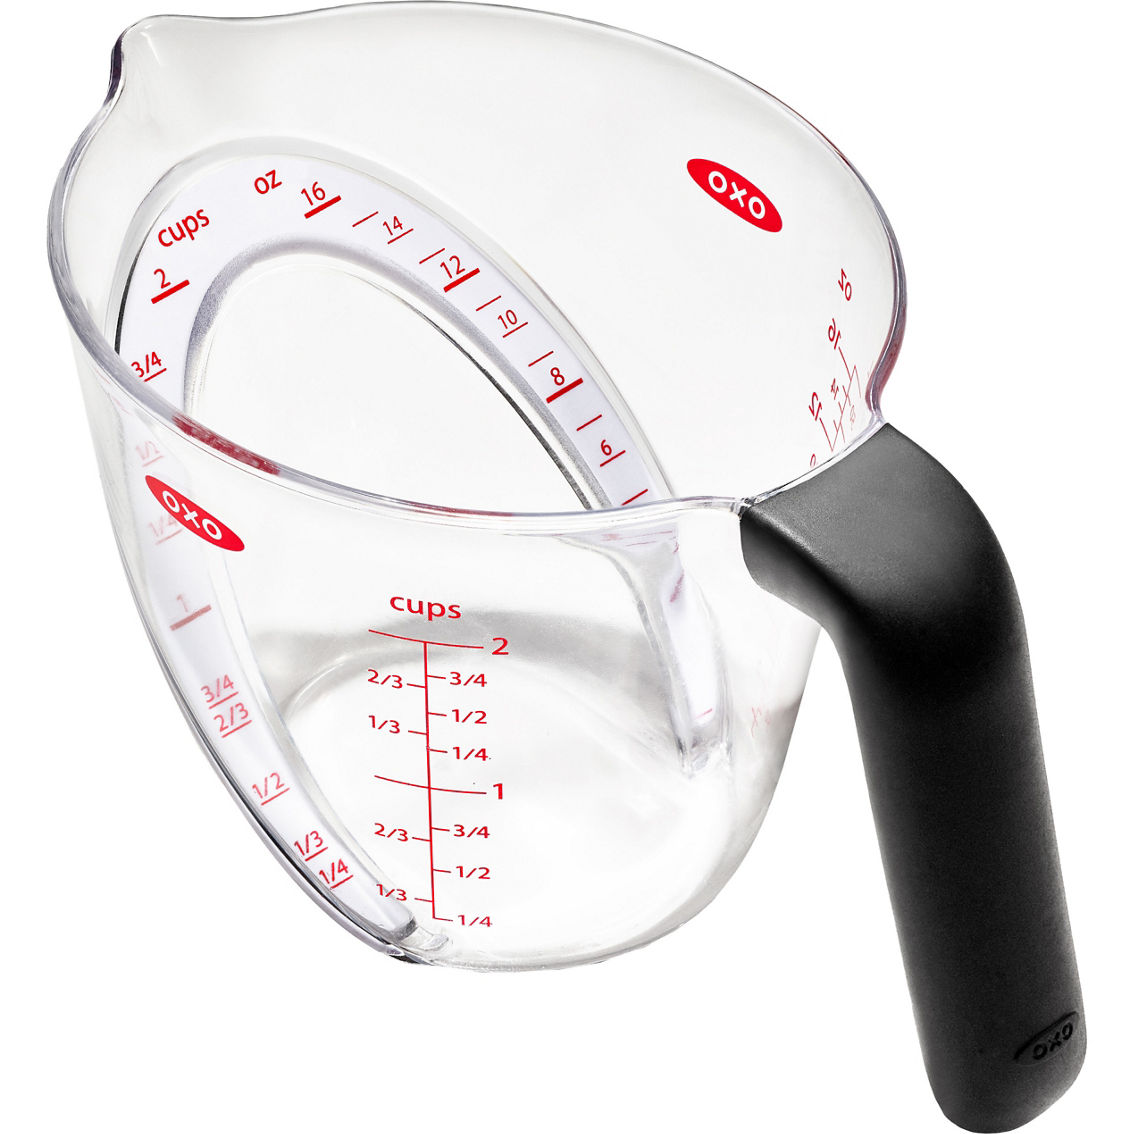 OXO 2-Cup Angled Measuring Cup - Image 2 of 2